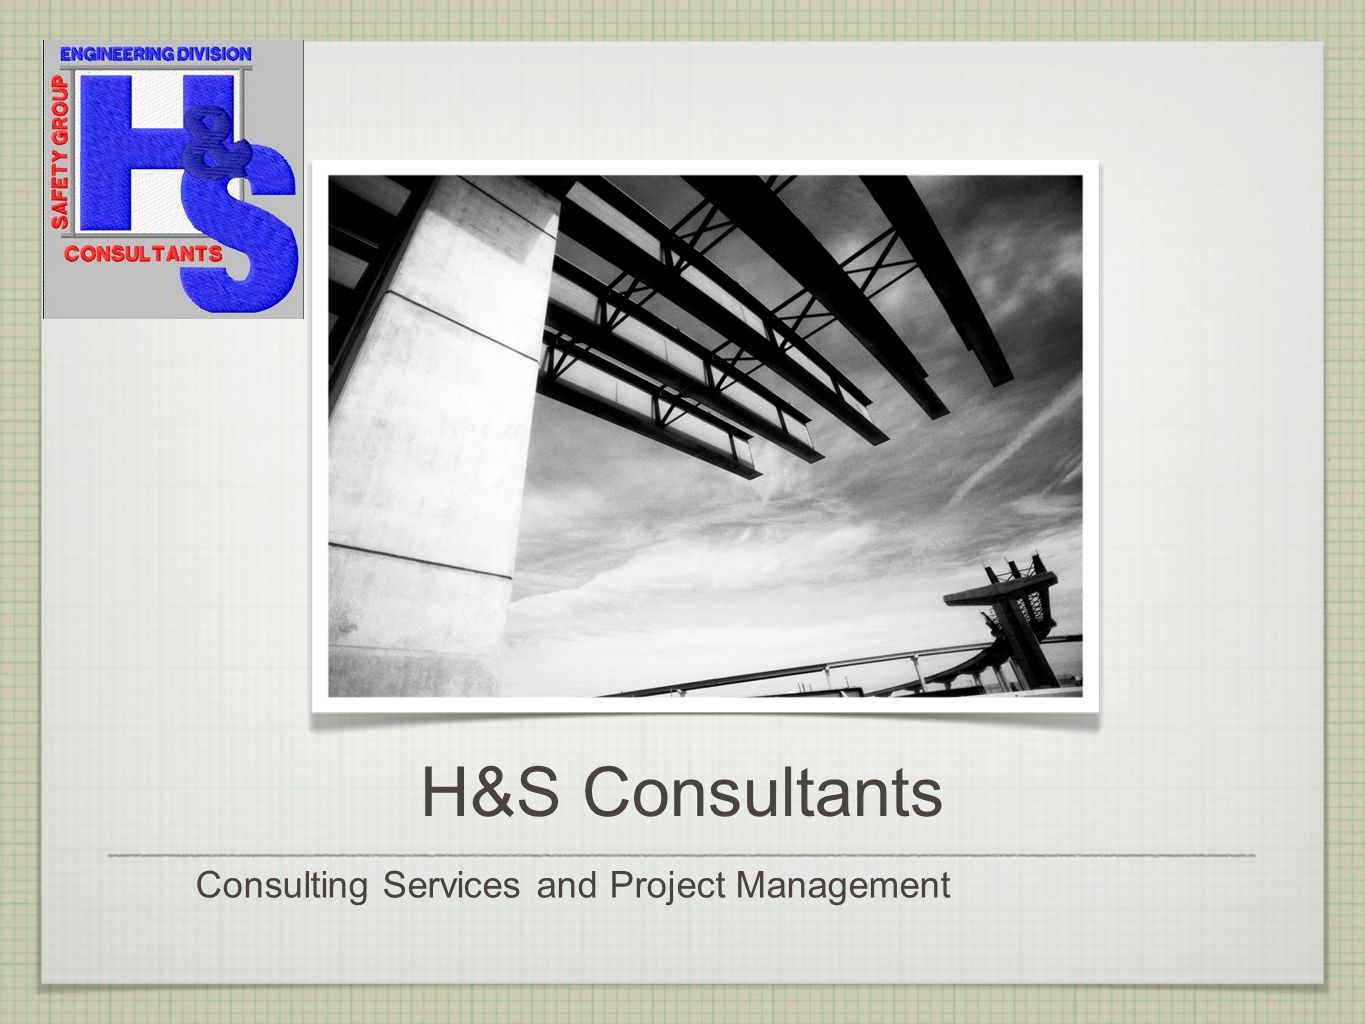 H&S Consultants Consulting Services and Project Management